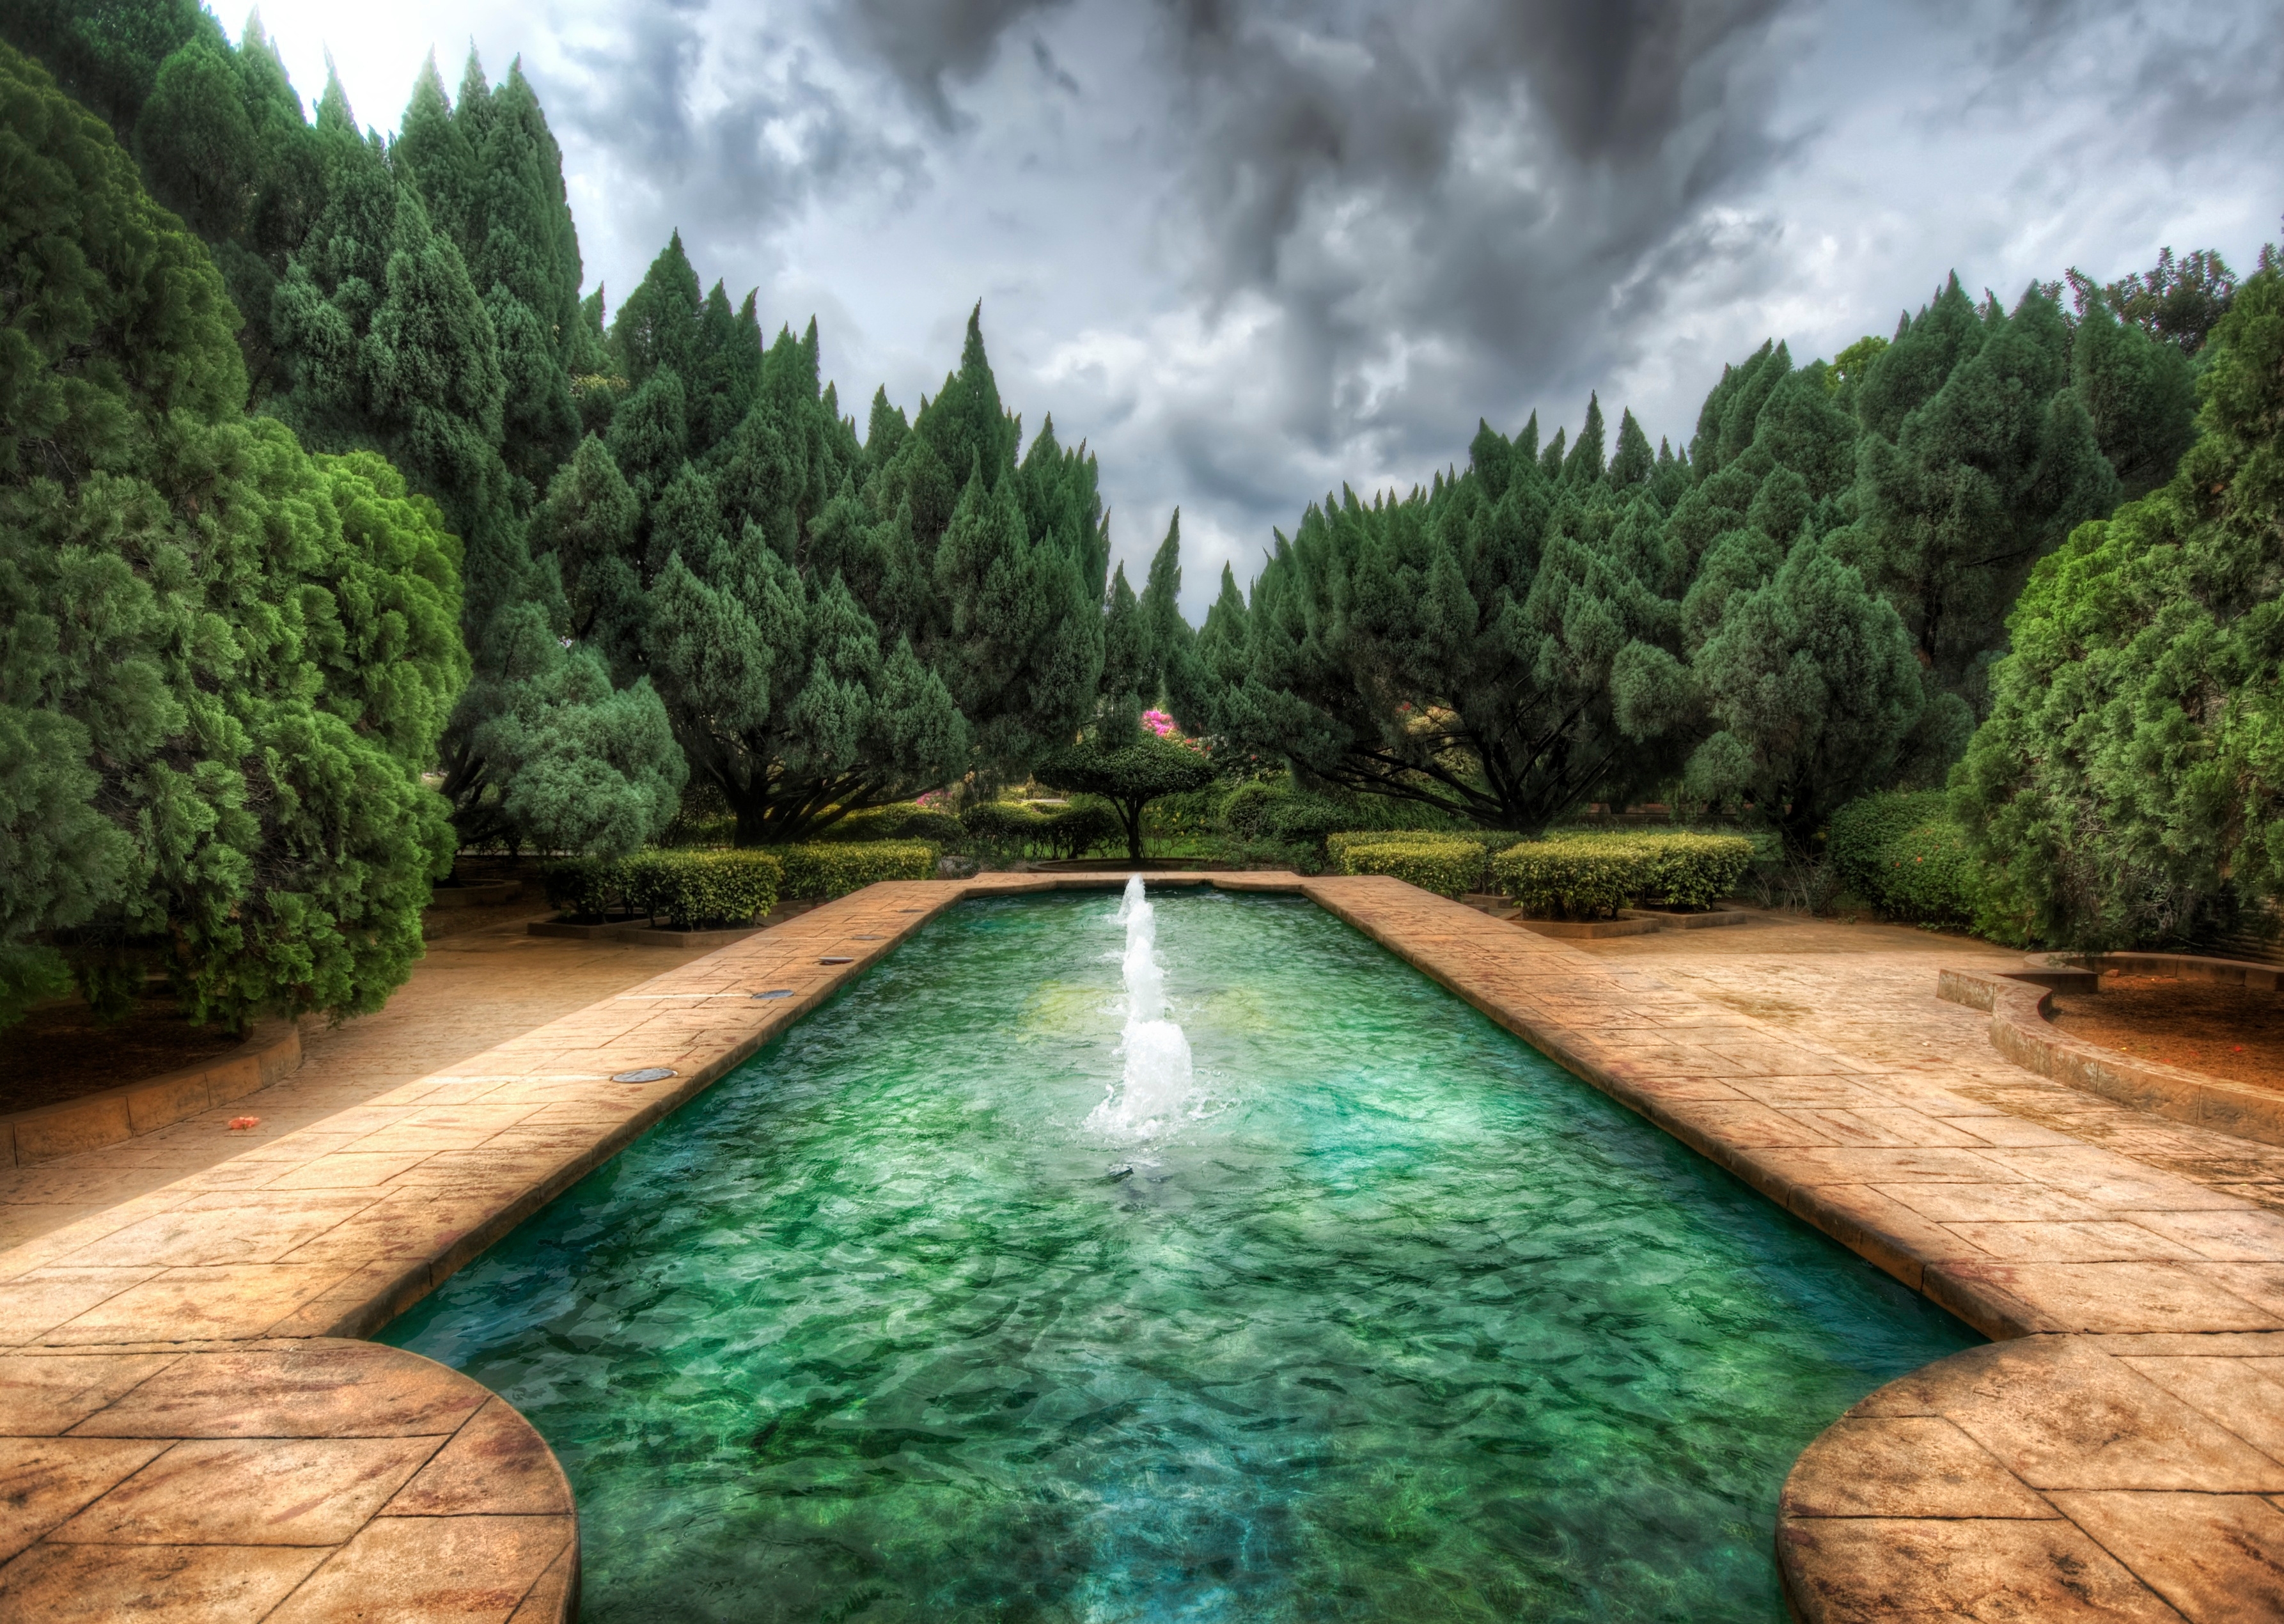 overcast, color, nature, fountain, forest, colors, mainly cloudy, paints, pool